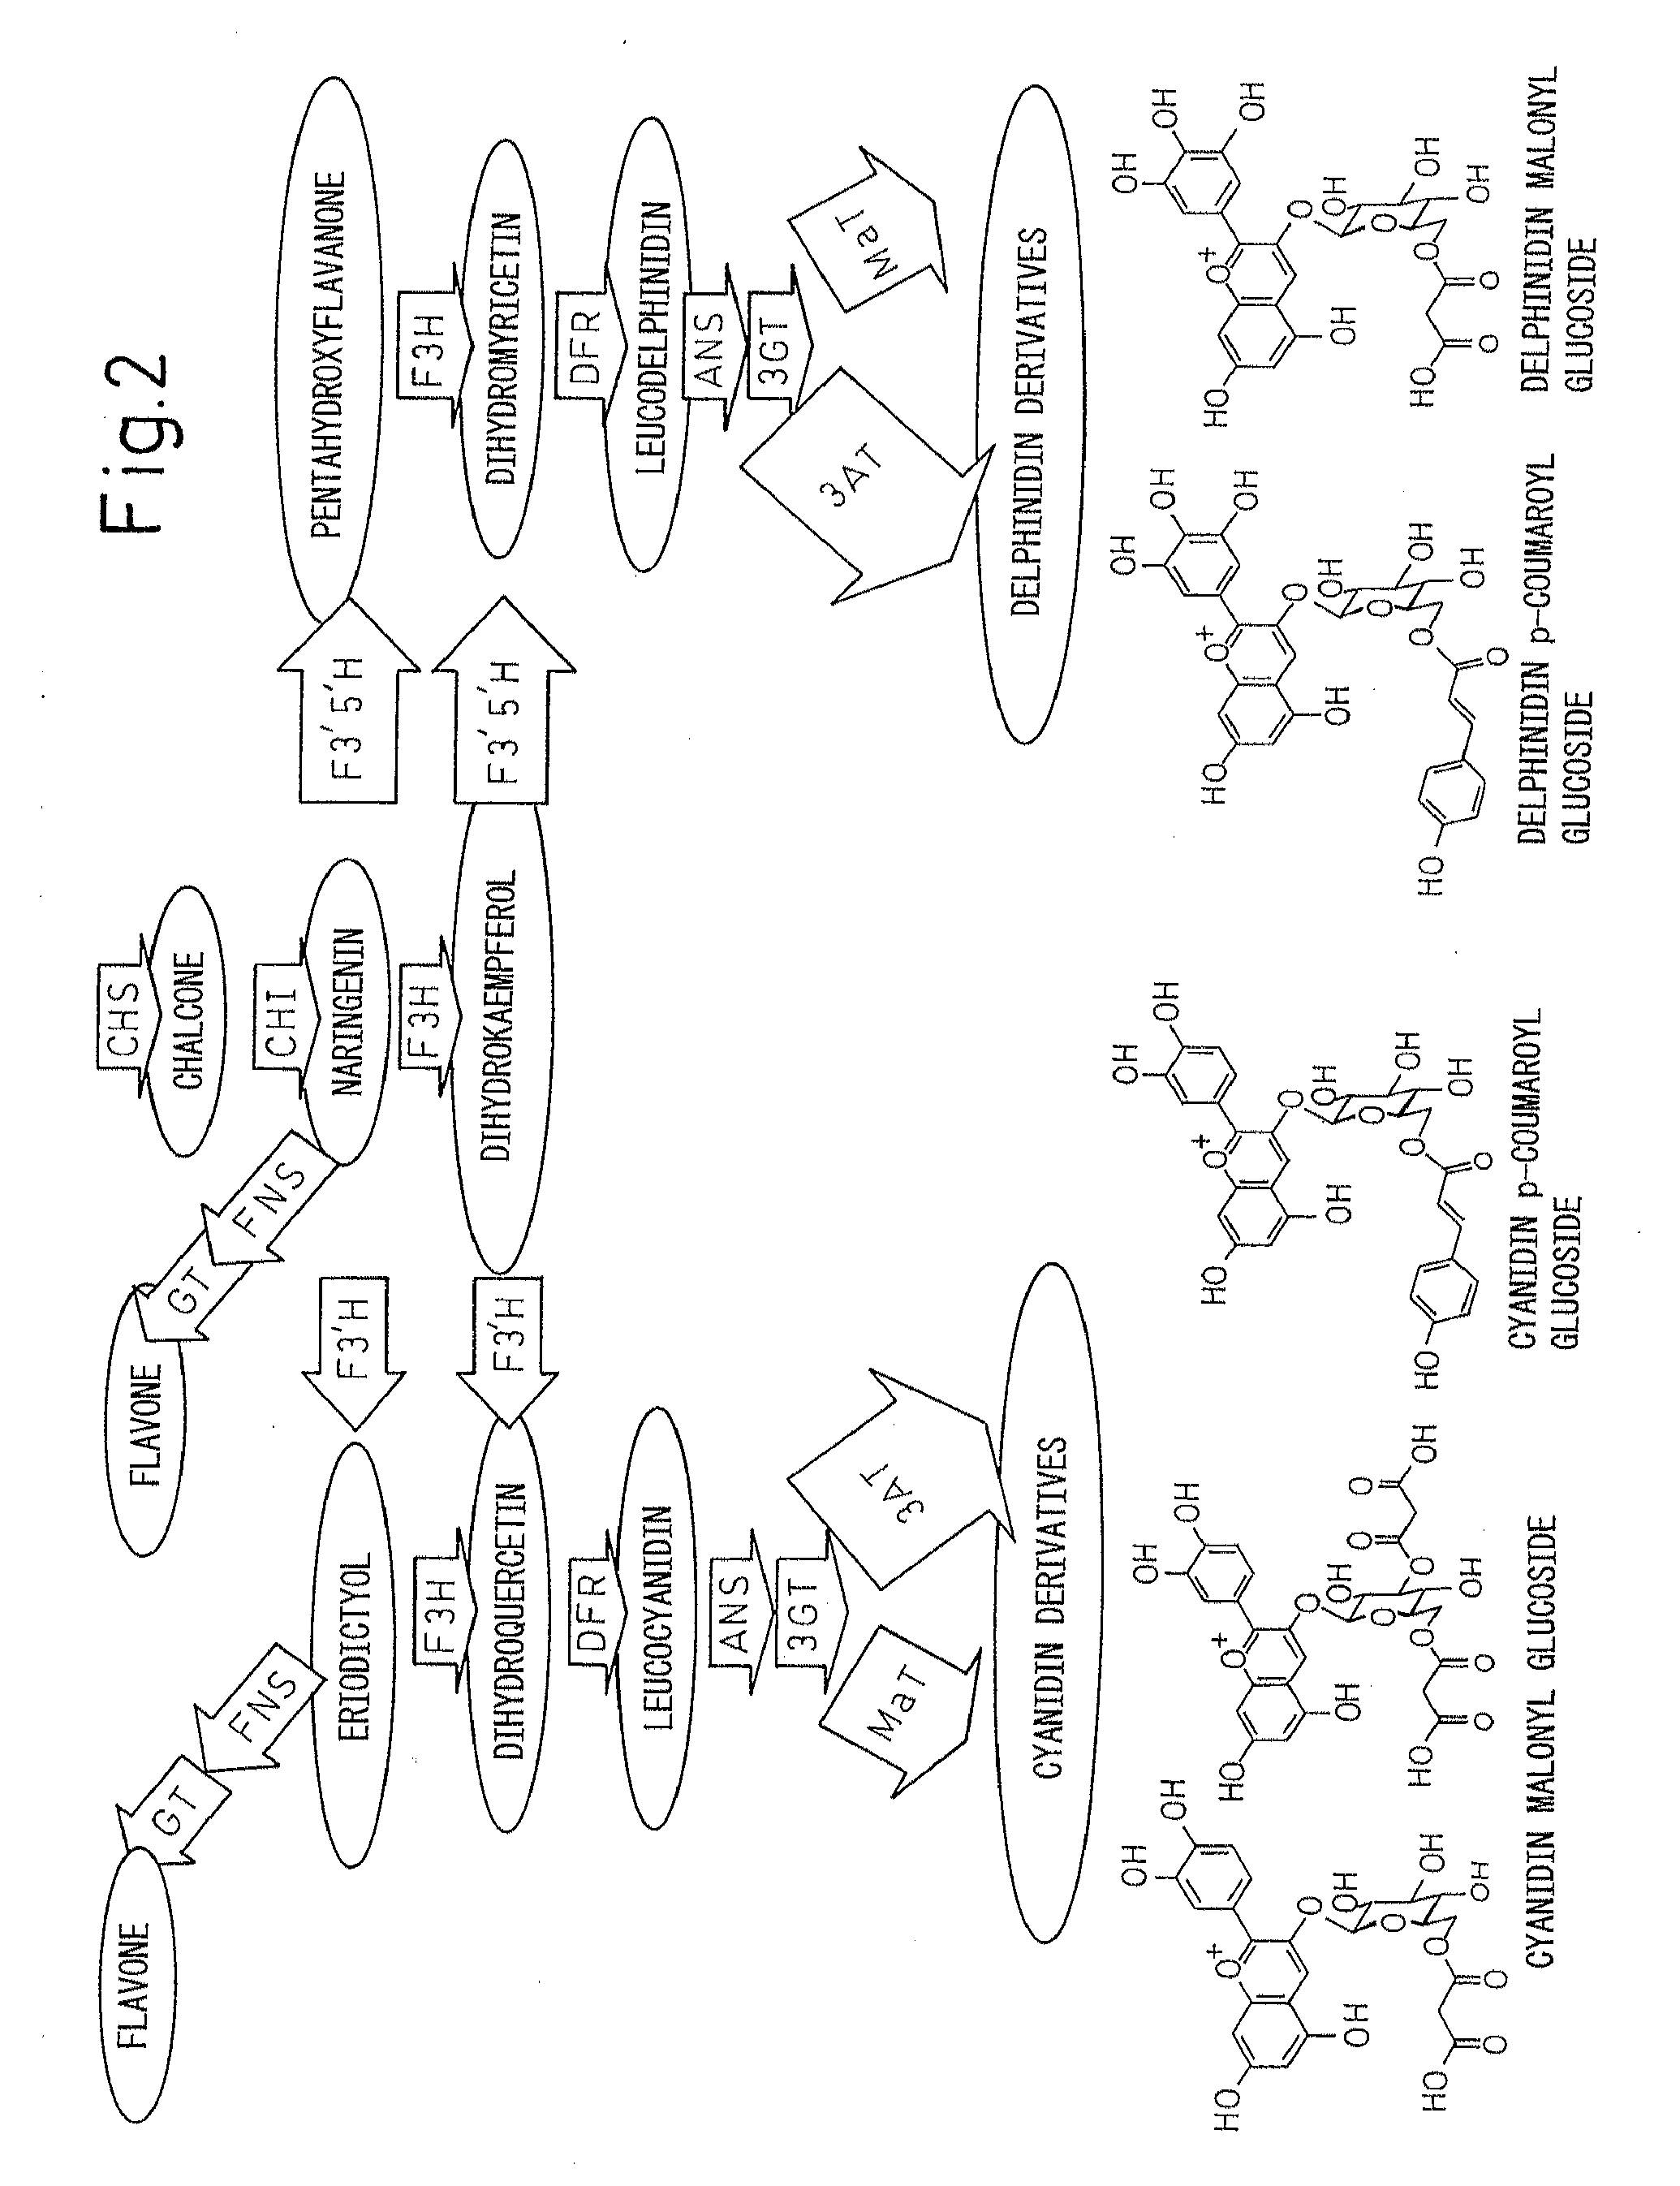 Method for producing chrysanthemum plant having petals containing modified anthocyanin